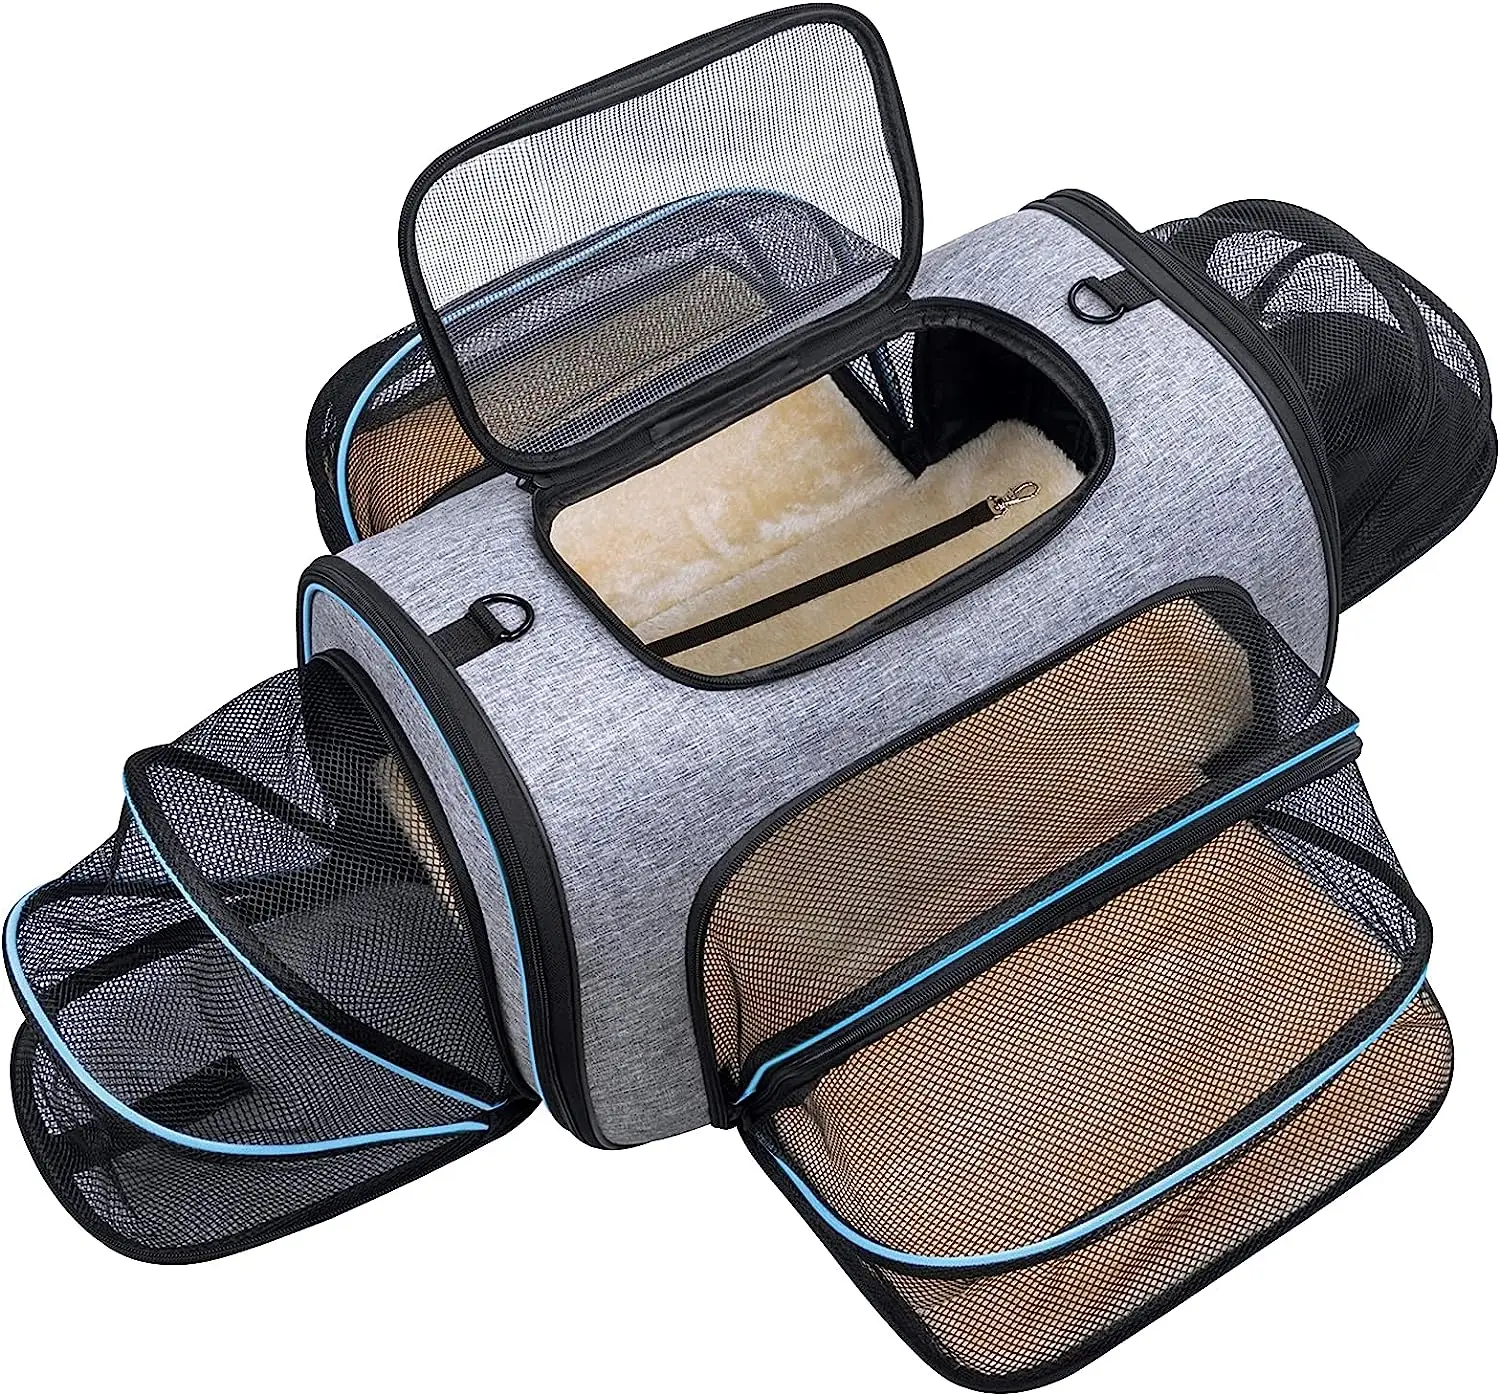 

Airline Approved Pet Carrier Soft Sided Pet Travel Carrier 4 Sides Expandable Cat Carrier with Fleece Pad for Cats Puppy